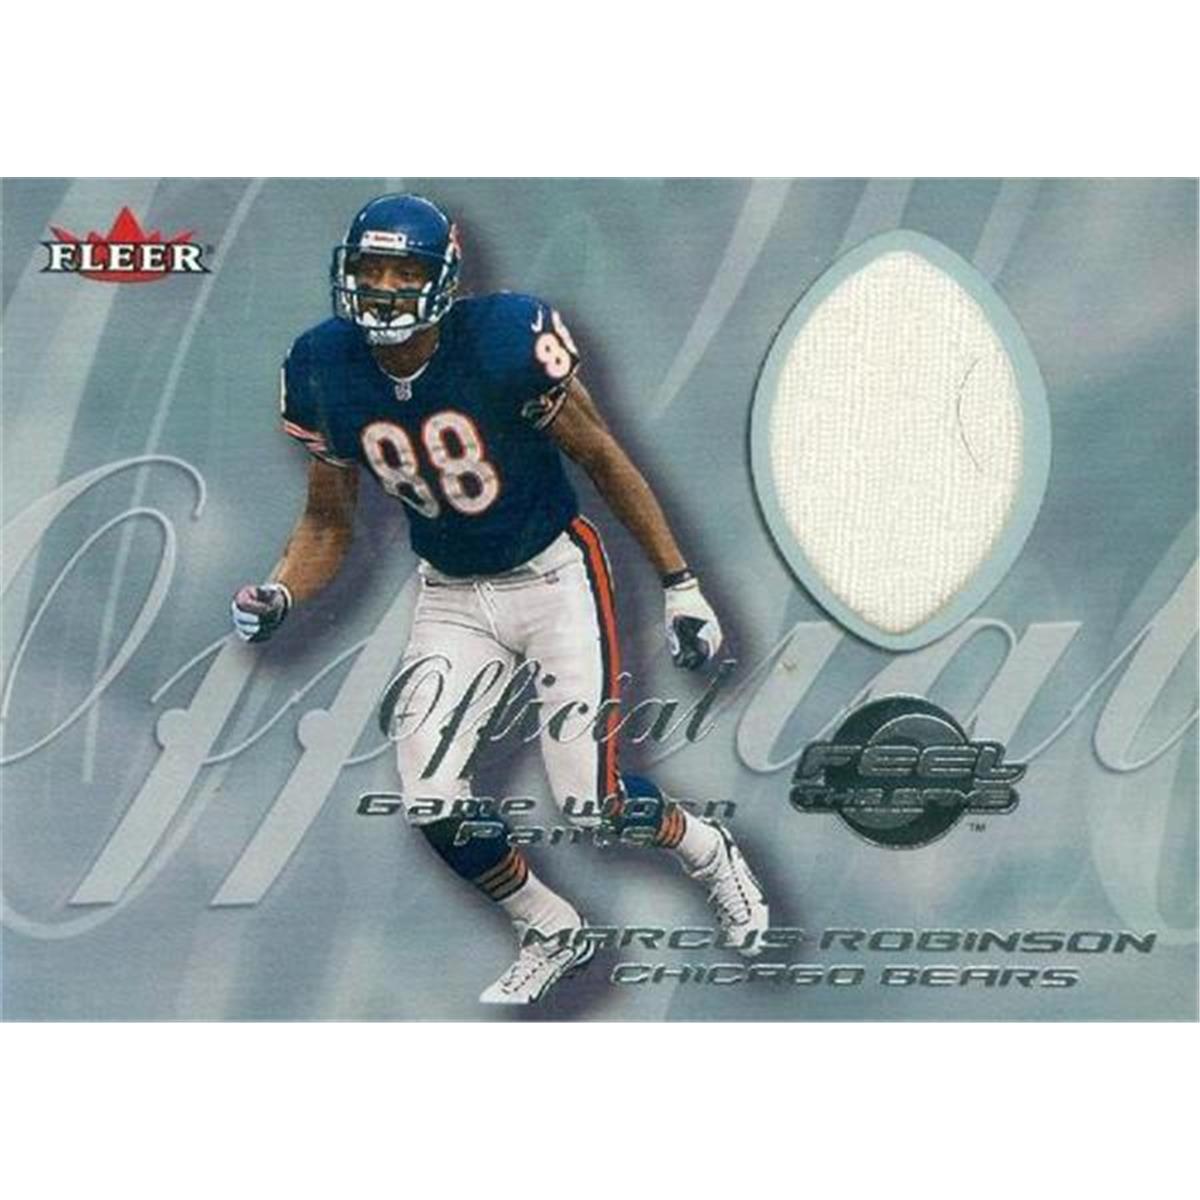 Autograph Warehouse 343158 Marcus Robinson Player Worn pants Patch Football Card - Chicago Bears 2000 Fleer Feel the Game